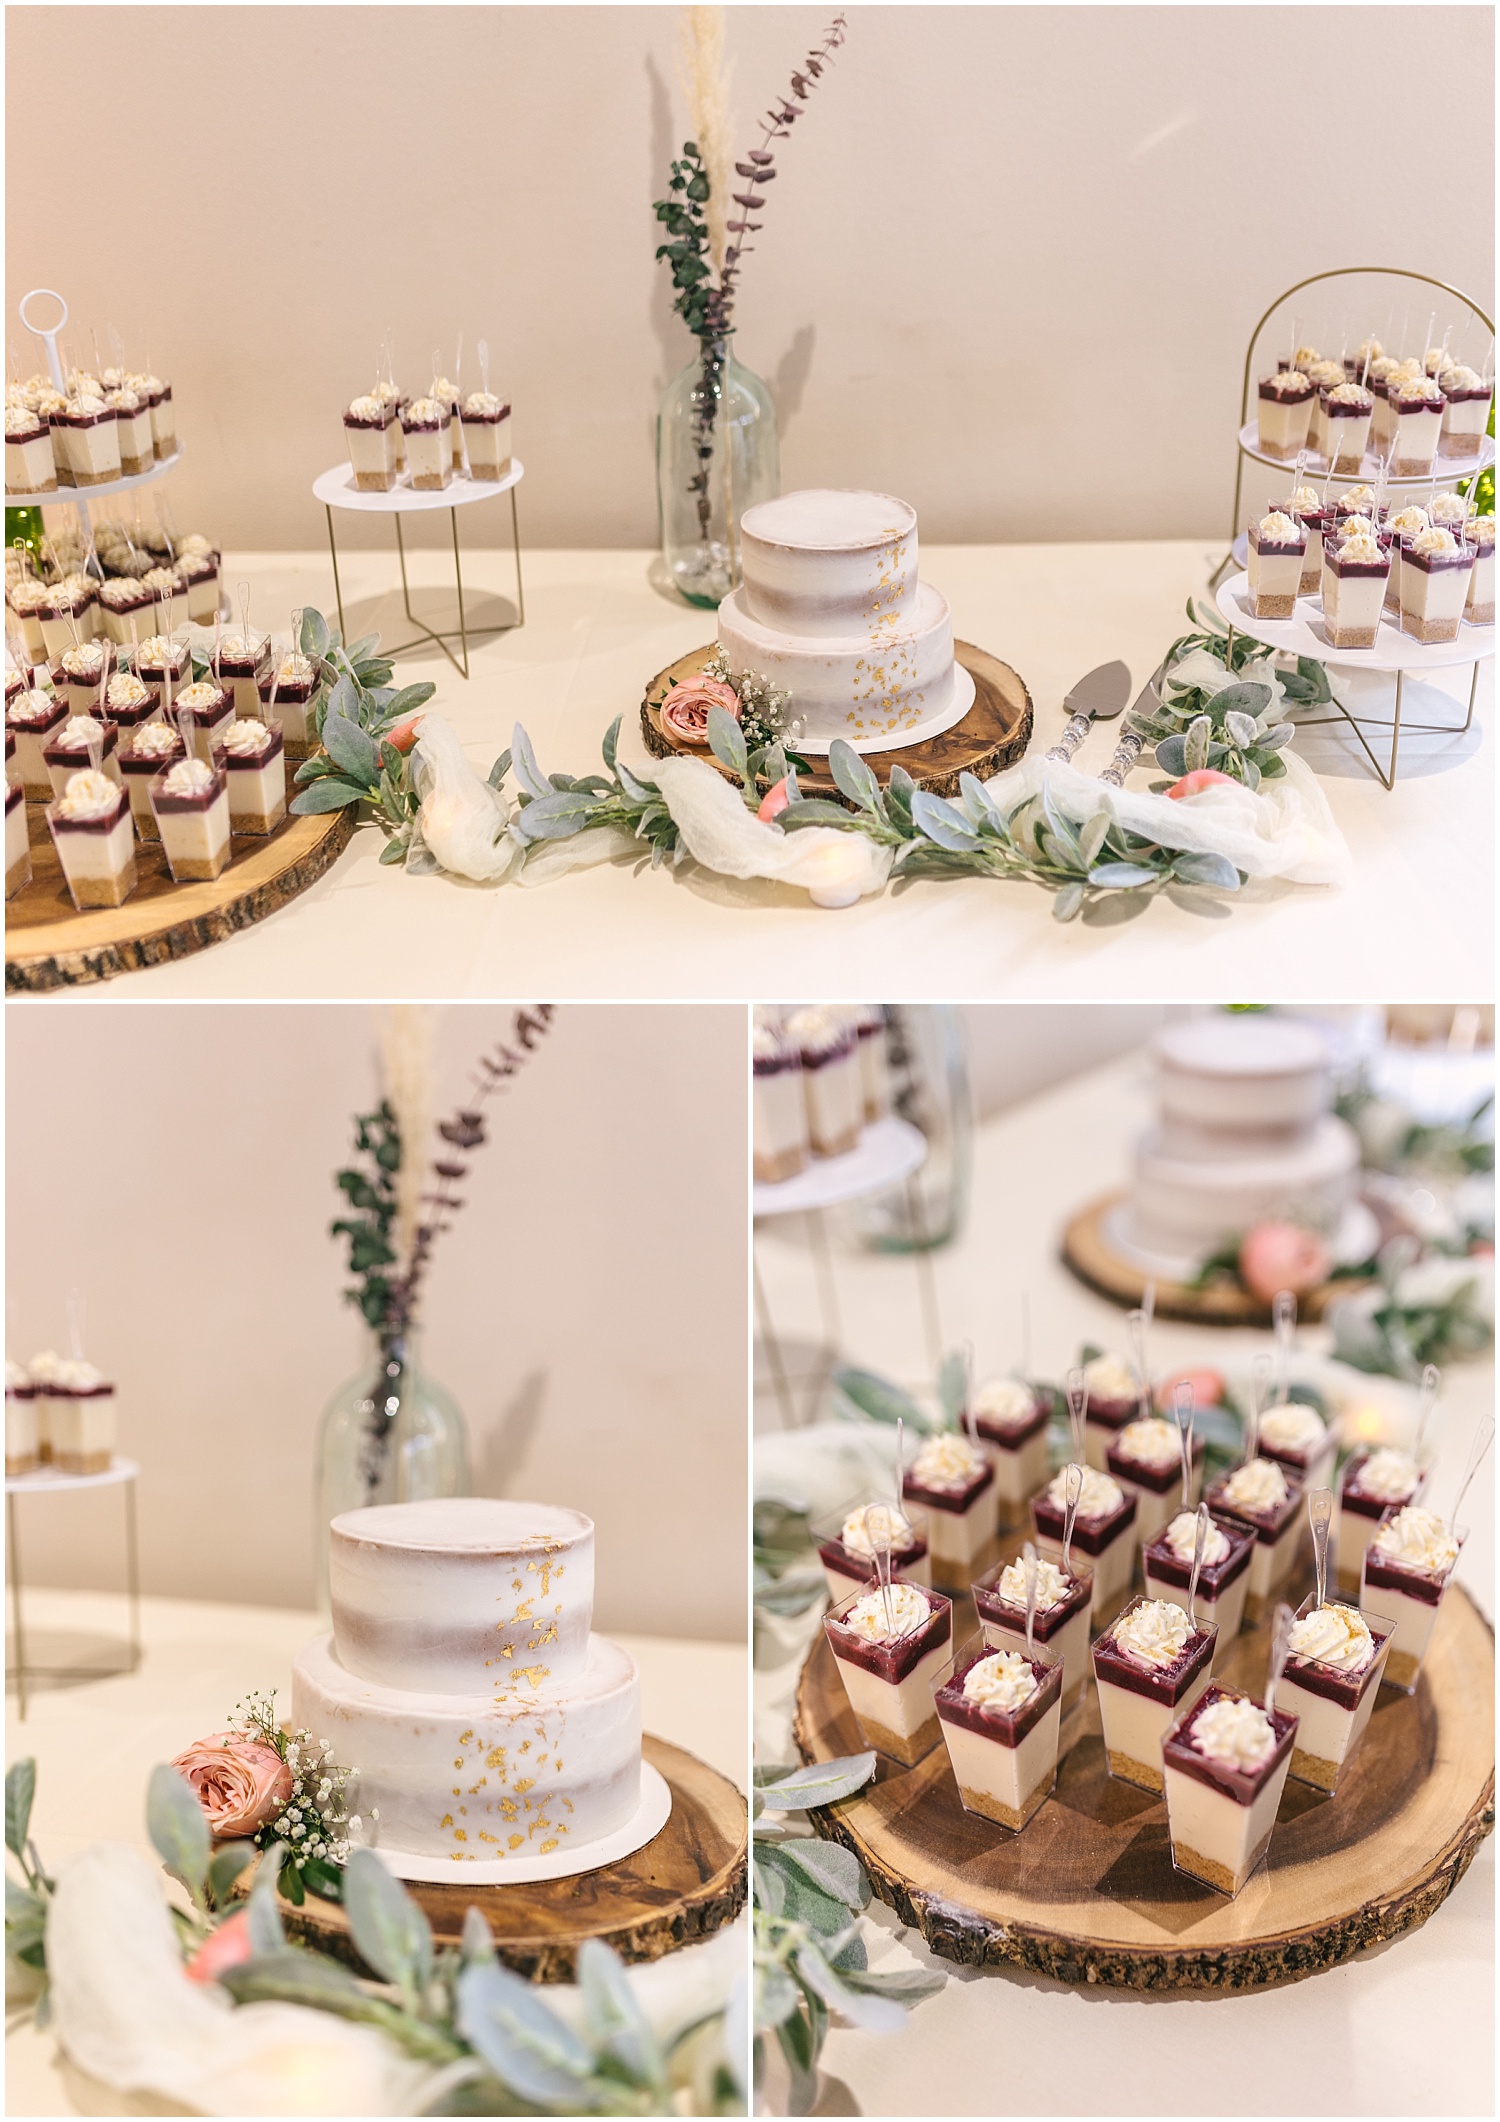 Cakes by Lexy with soft rose and greenery details